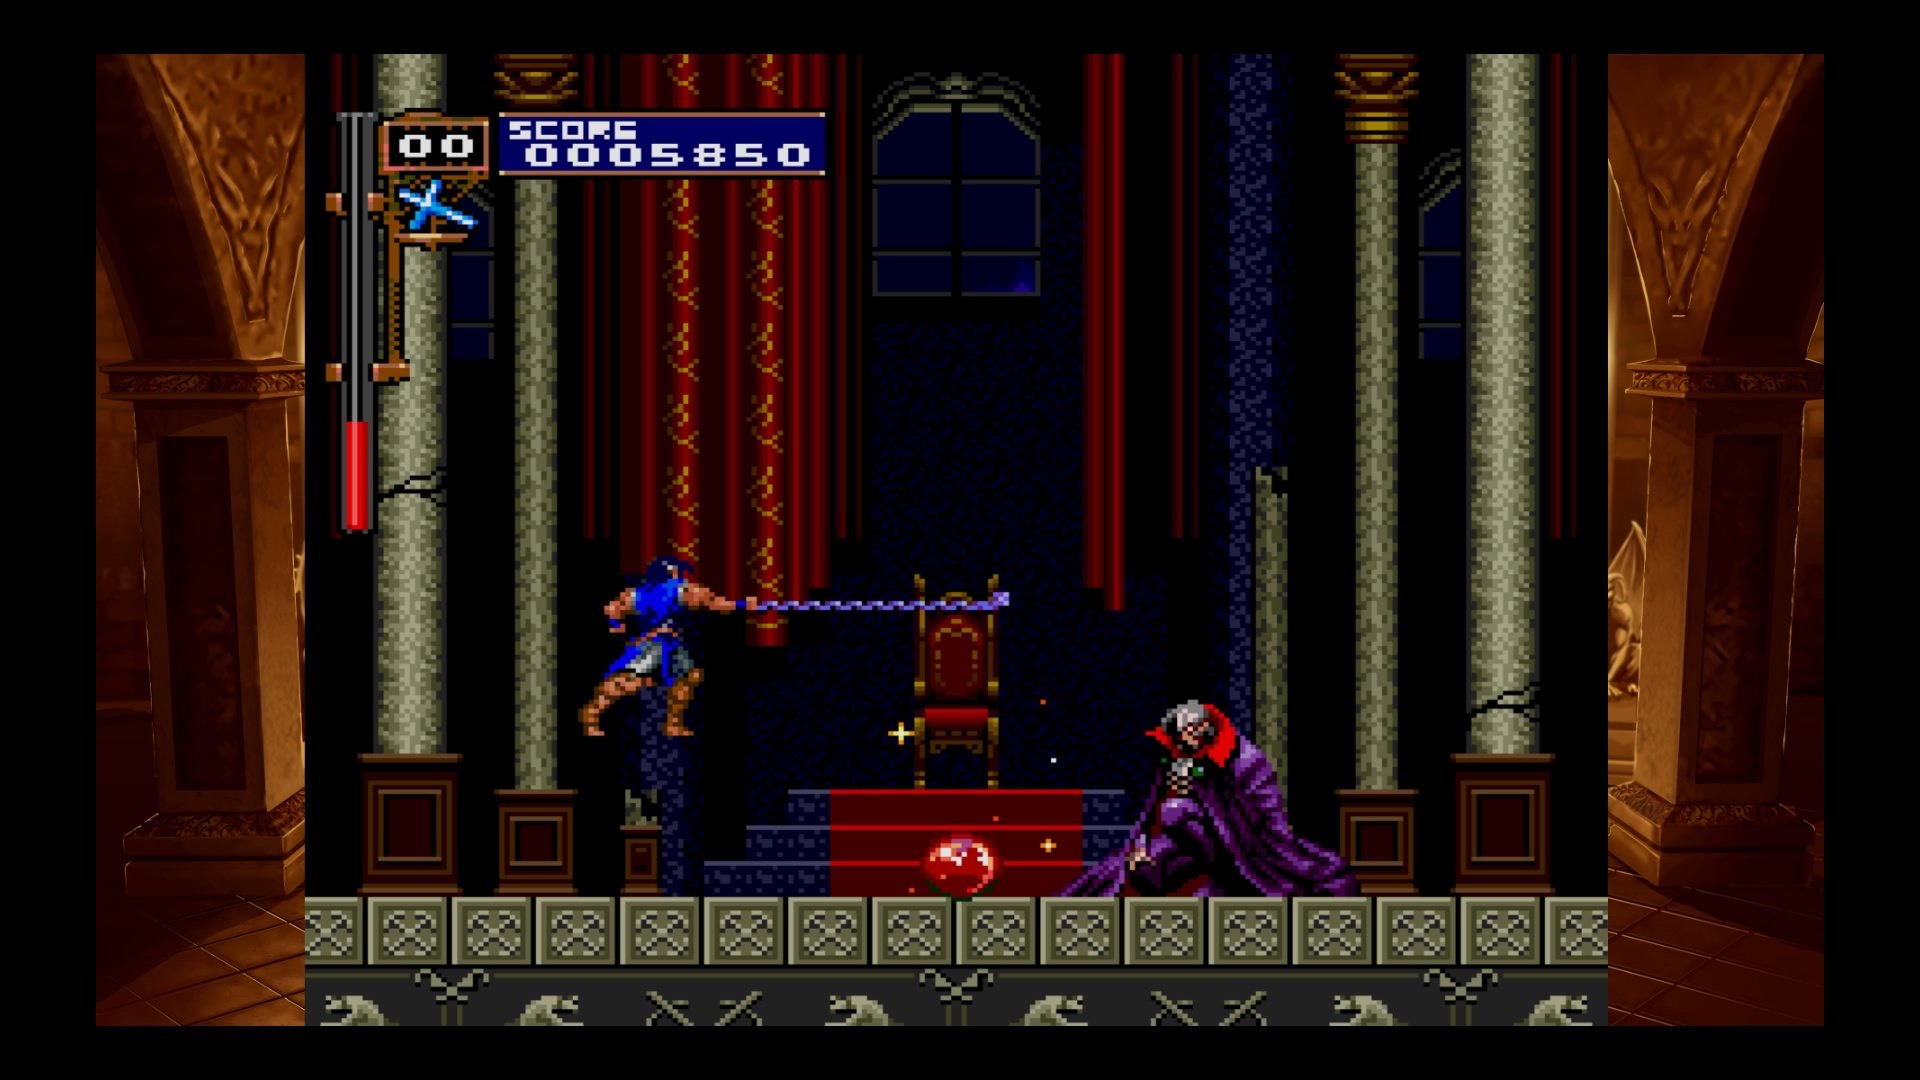 castlevania rondo of blood pc engine rom large file